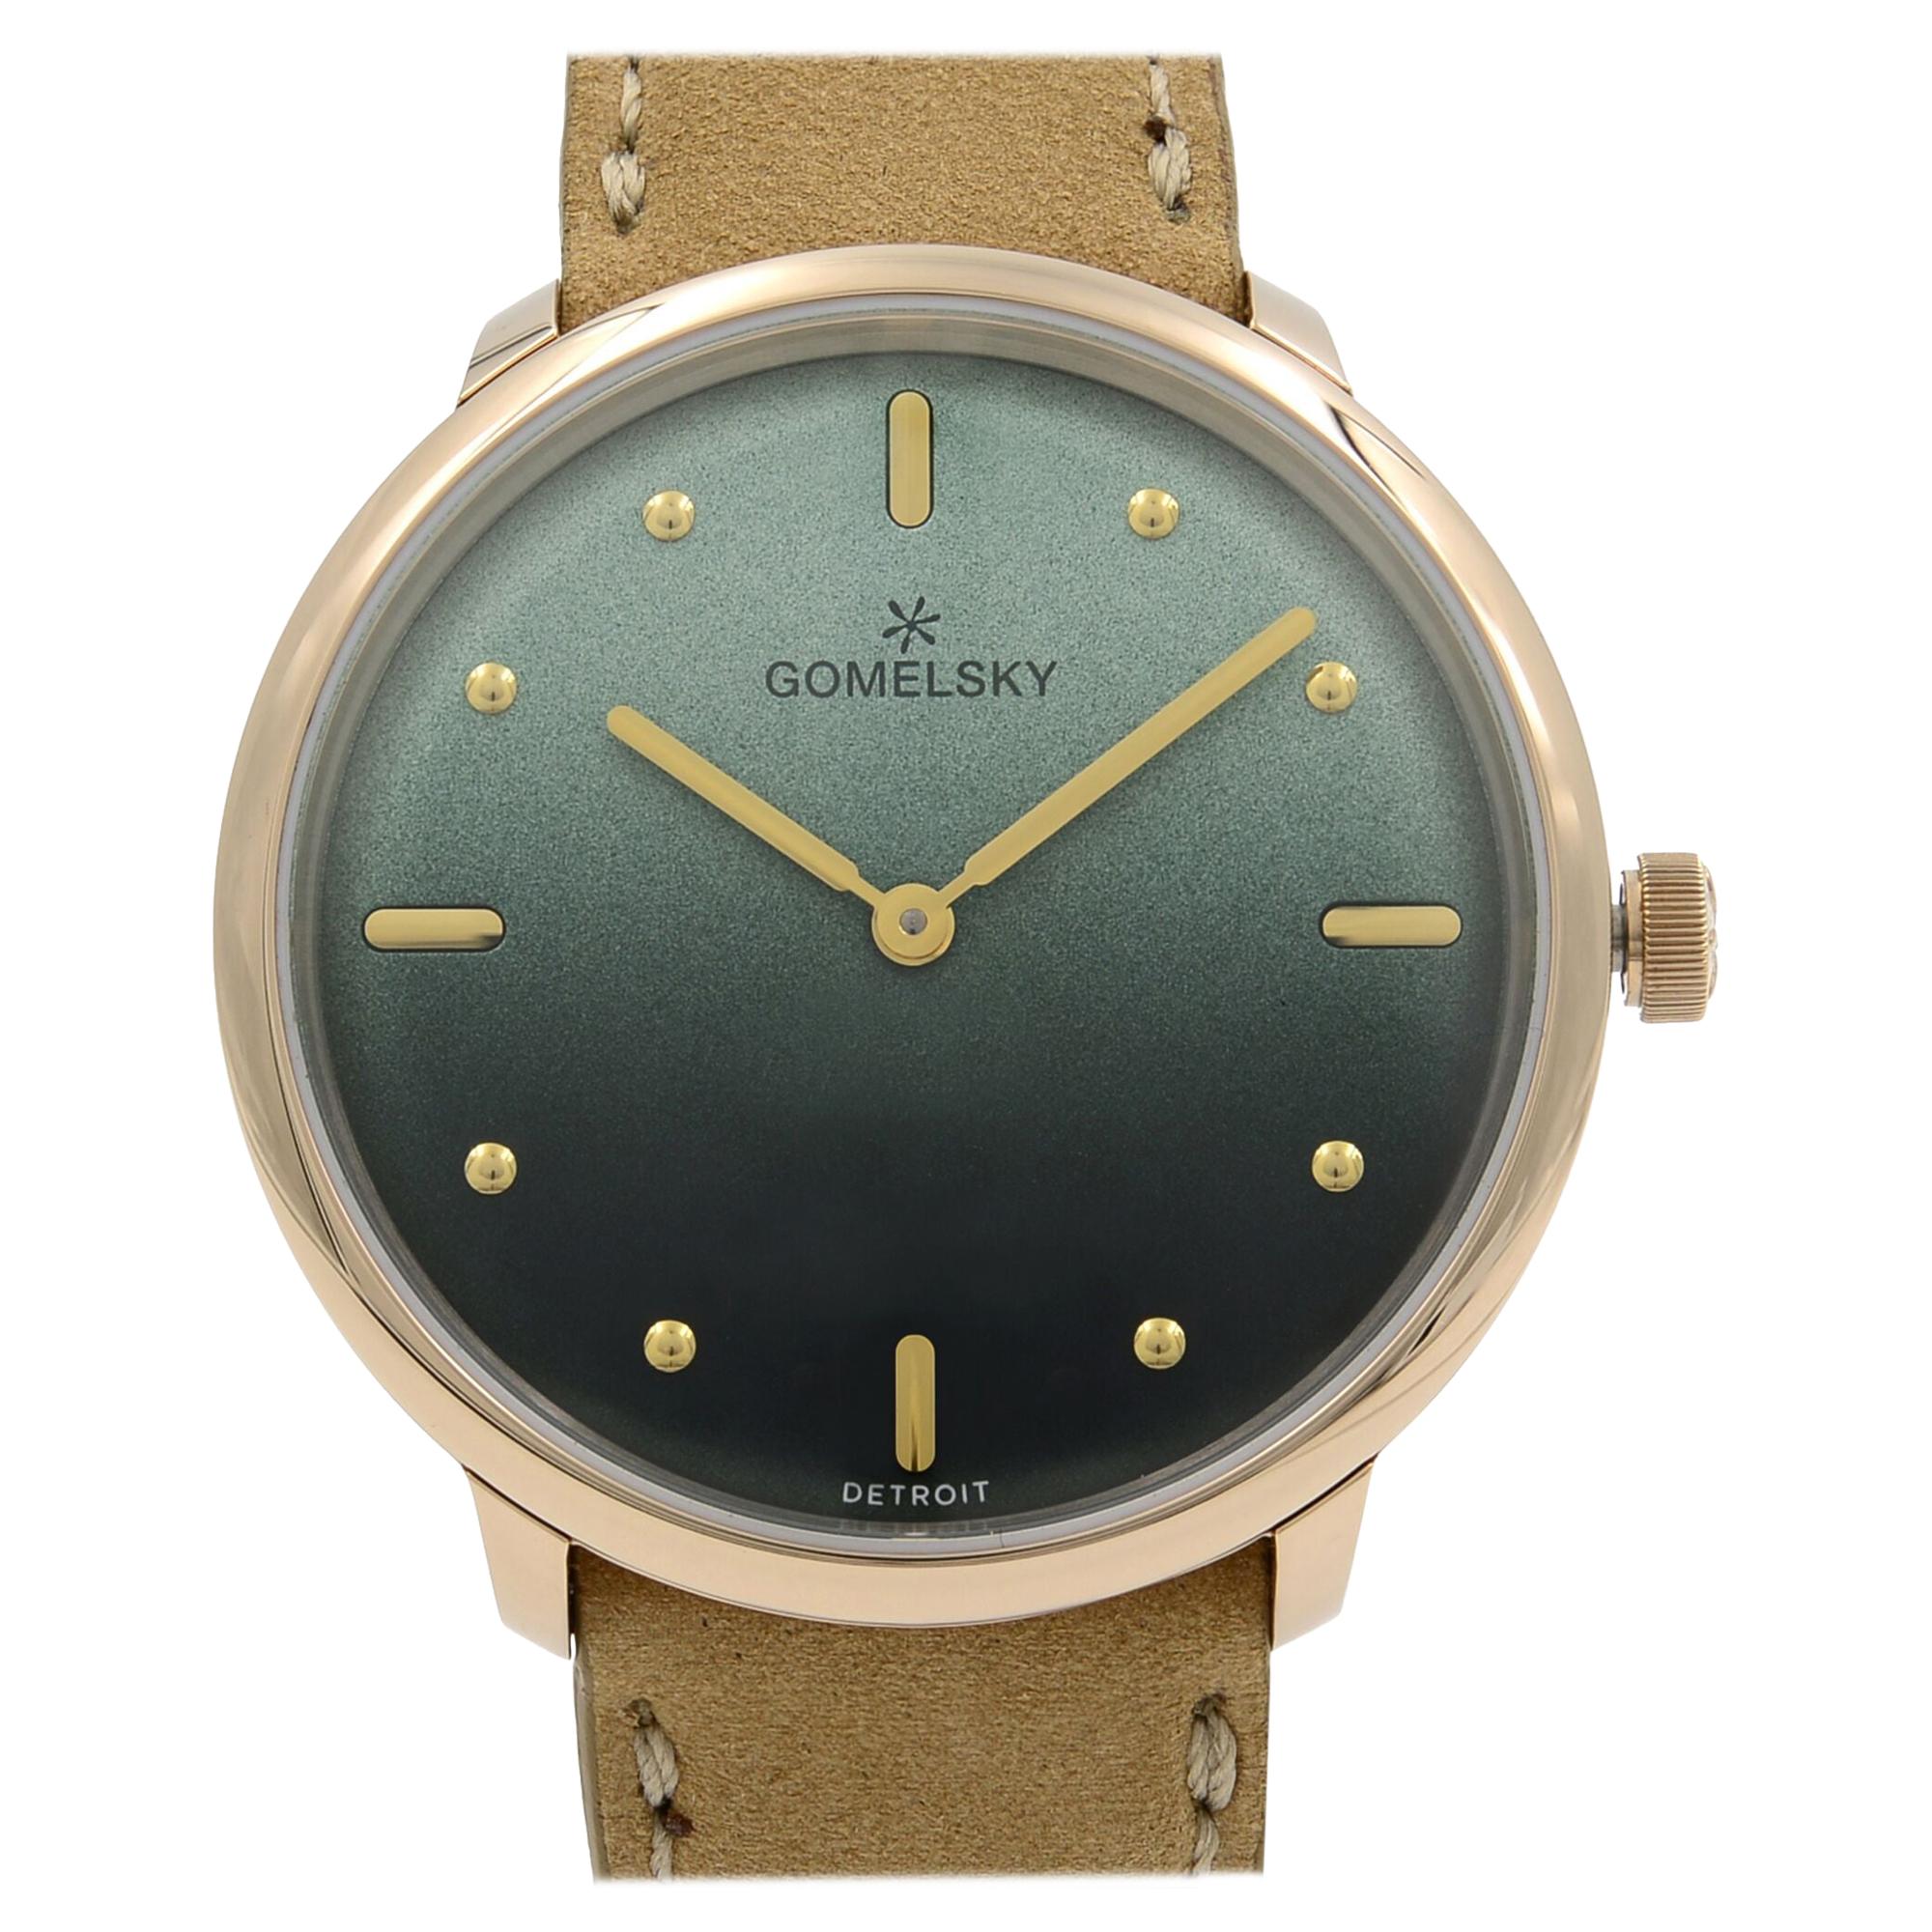 This brand new Gomelsky by Shinola Audrey 6 G0120147279 is a beautiful Ladies timepiece that is powered by a quartz movement which is cased in a stainless steel case. It has a round shape face,  dial, and has hand sticks & dots style markers. It is